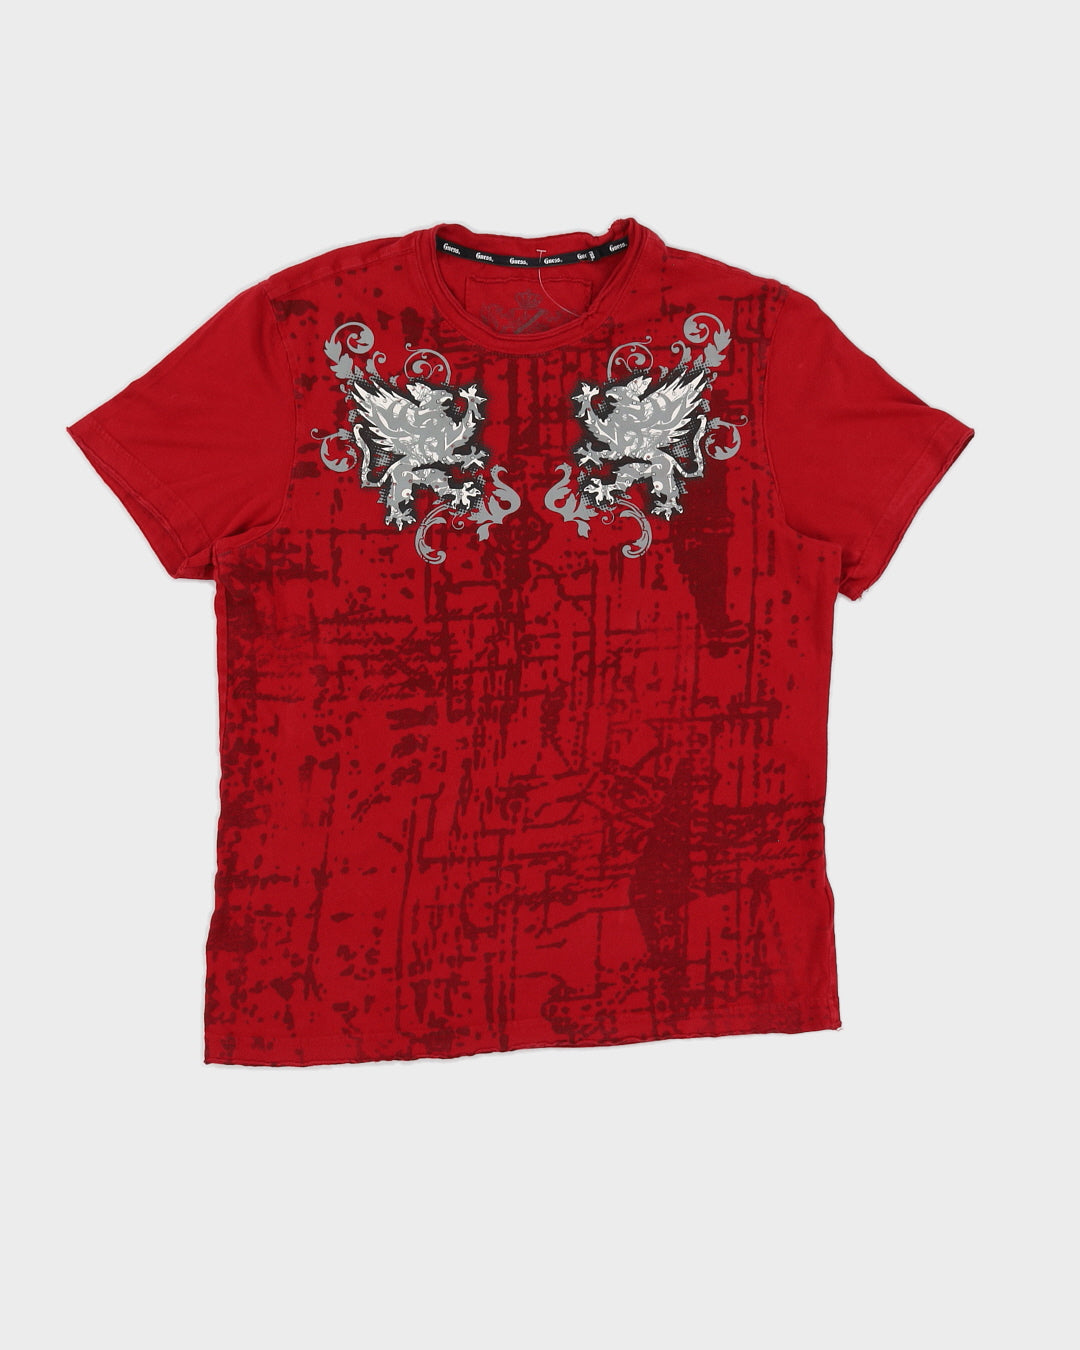 00s Y2K Guess Printed Red T-Shirt - M